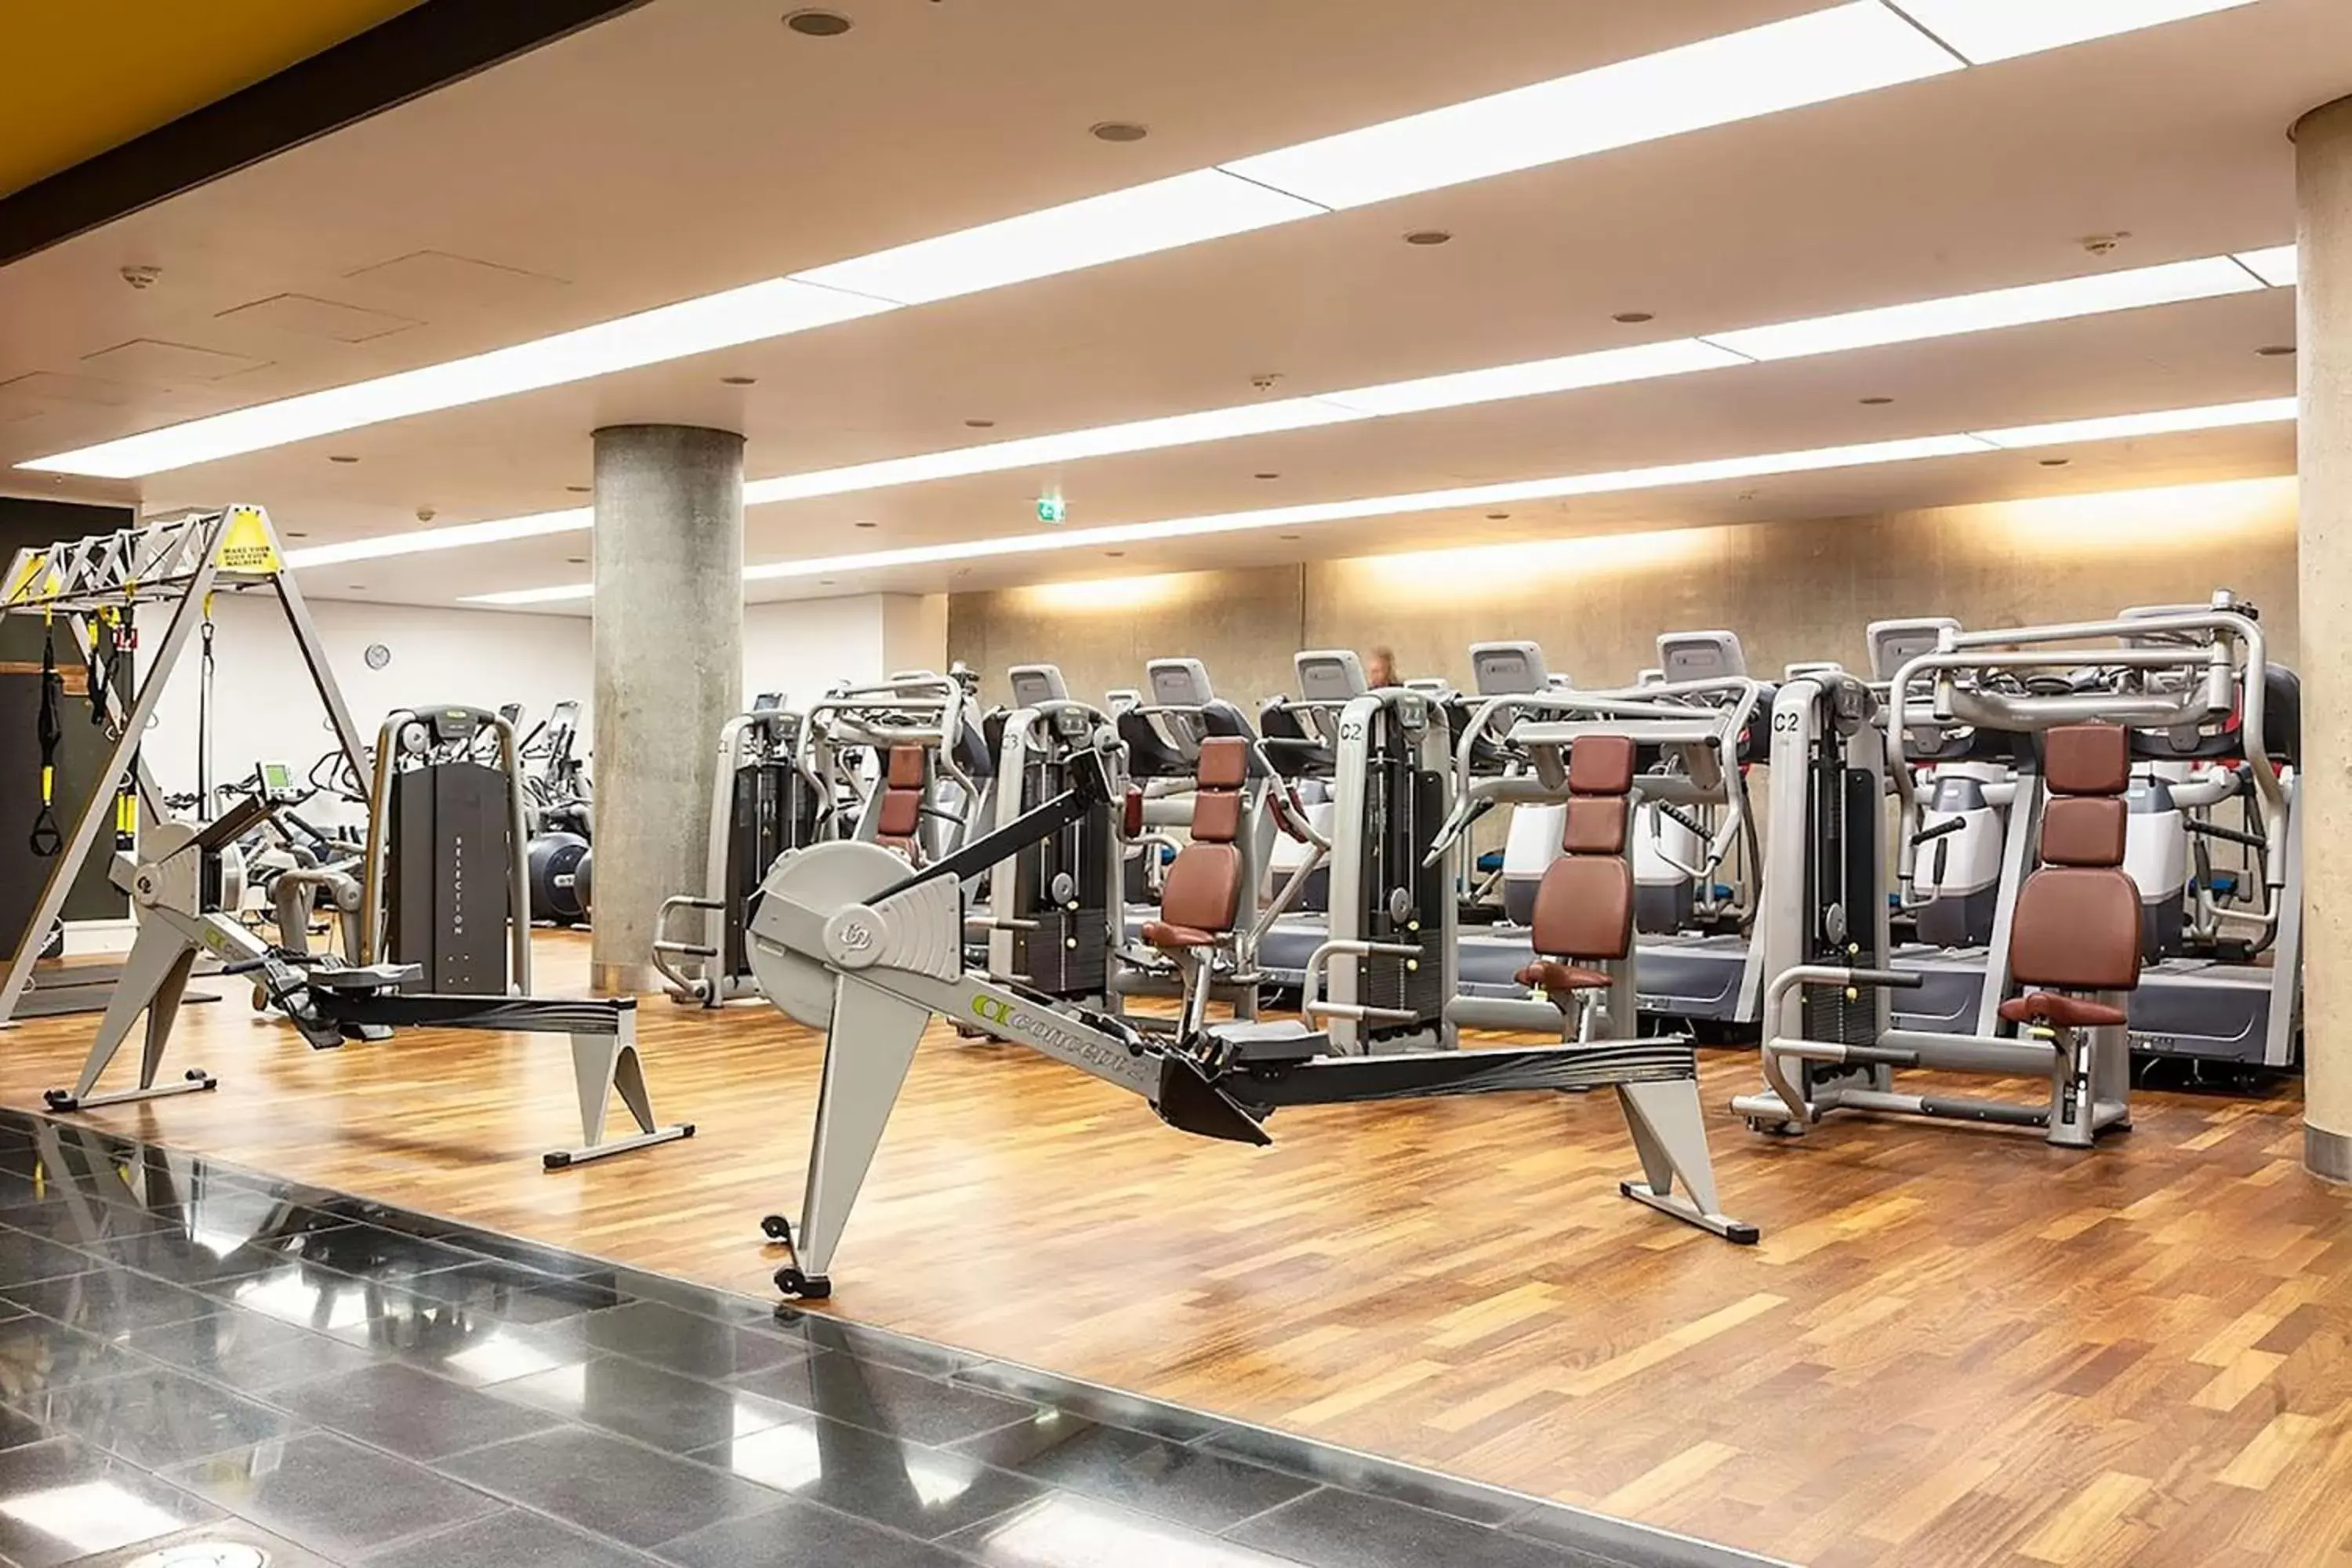 Fitness centre/facilities, Fitness Center/Facilities in Hotel Kö59 Düsseldorf - Member of Hommage Luxury Hotels Collection